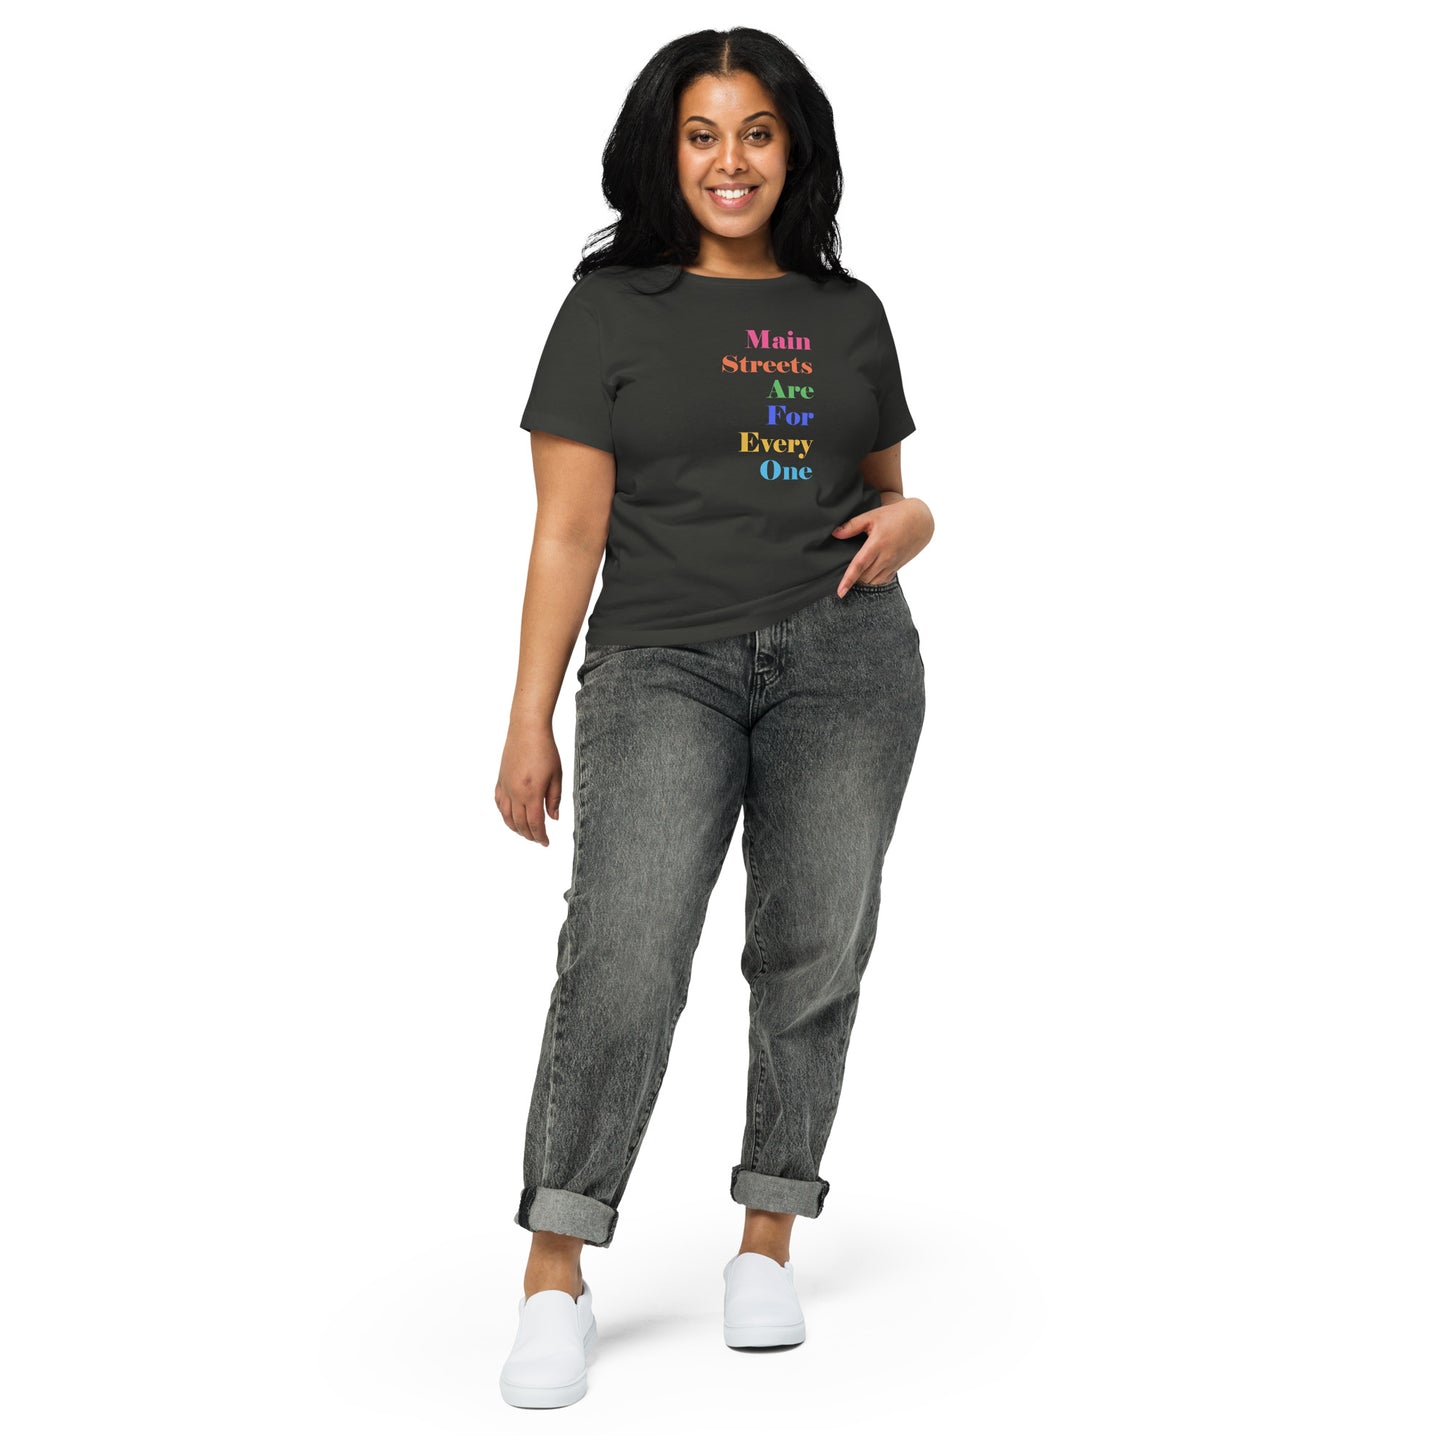 Main Streets Are For Everyone Women’s High-Waisted T-shirt